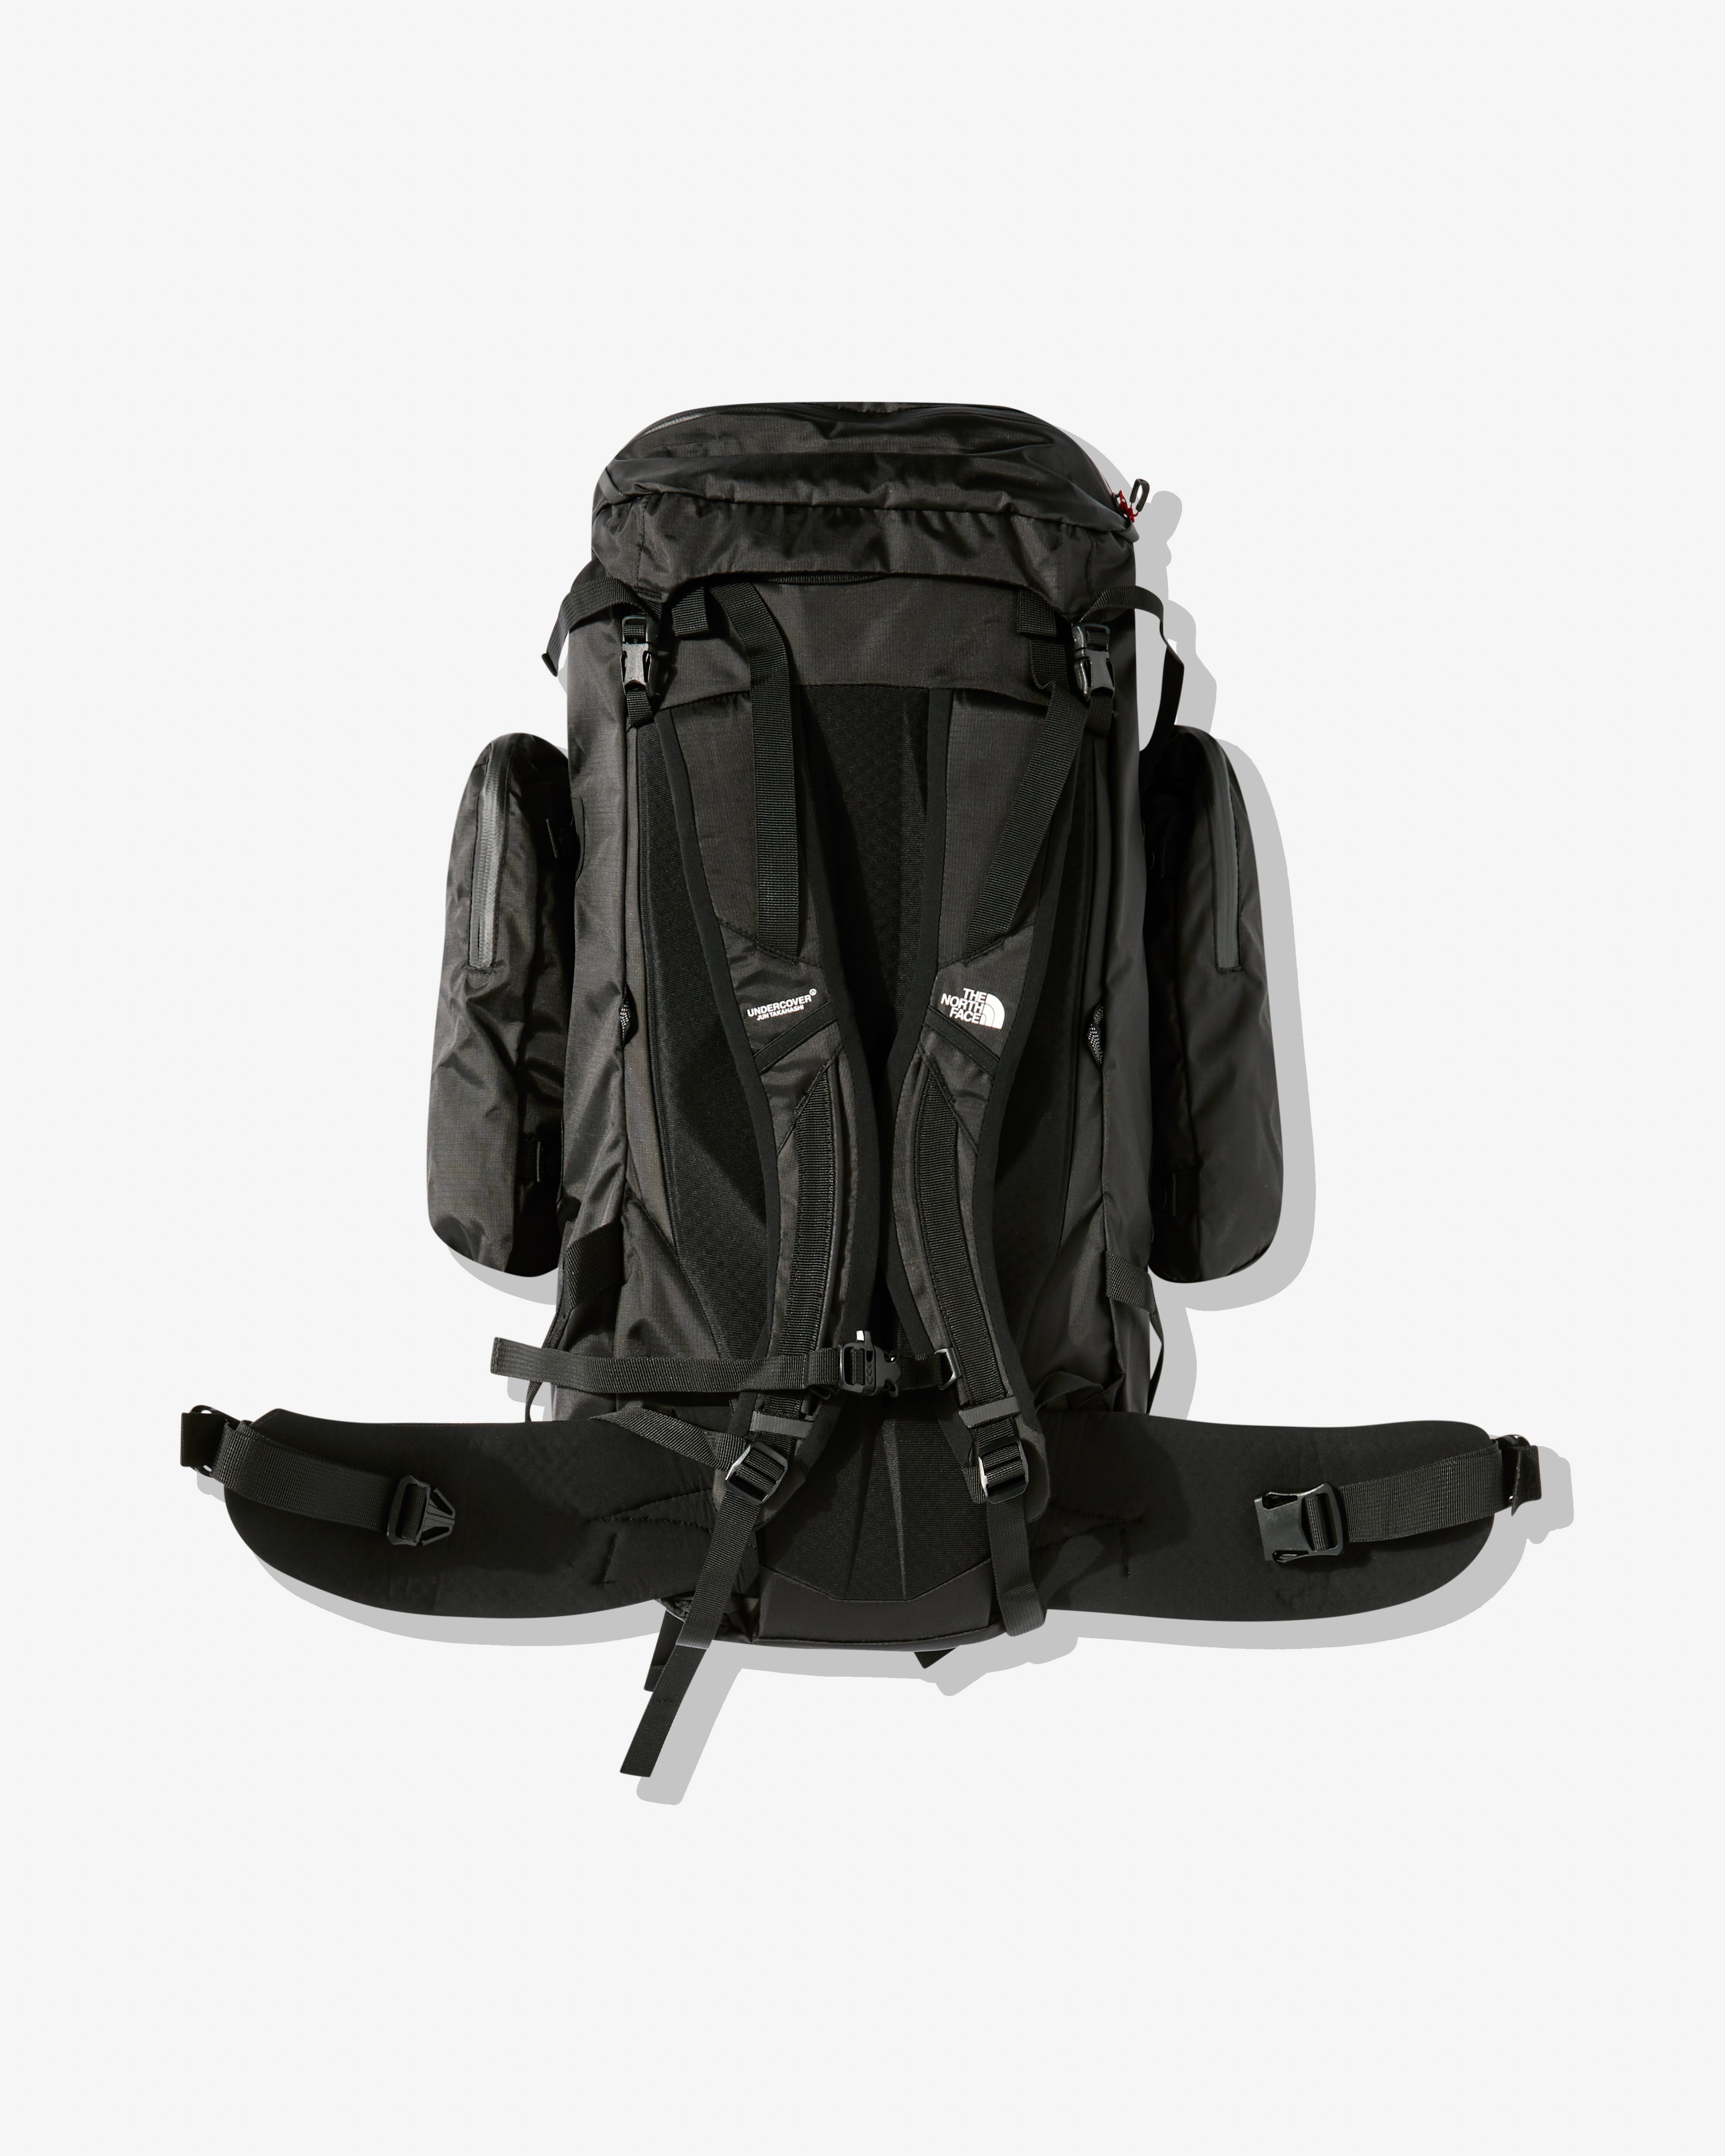 The North Face - Undercover Soukuu Hike 38L Backpack - (Black)